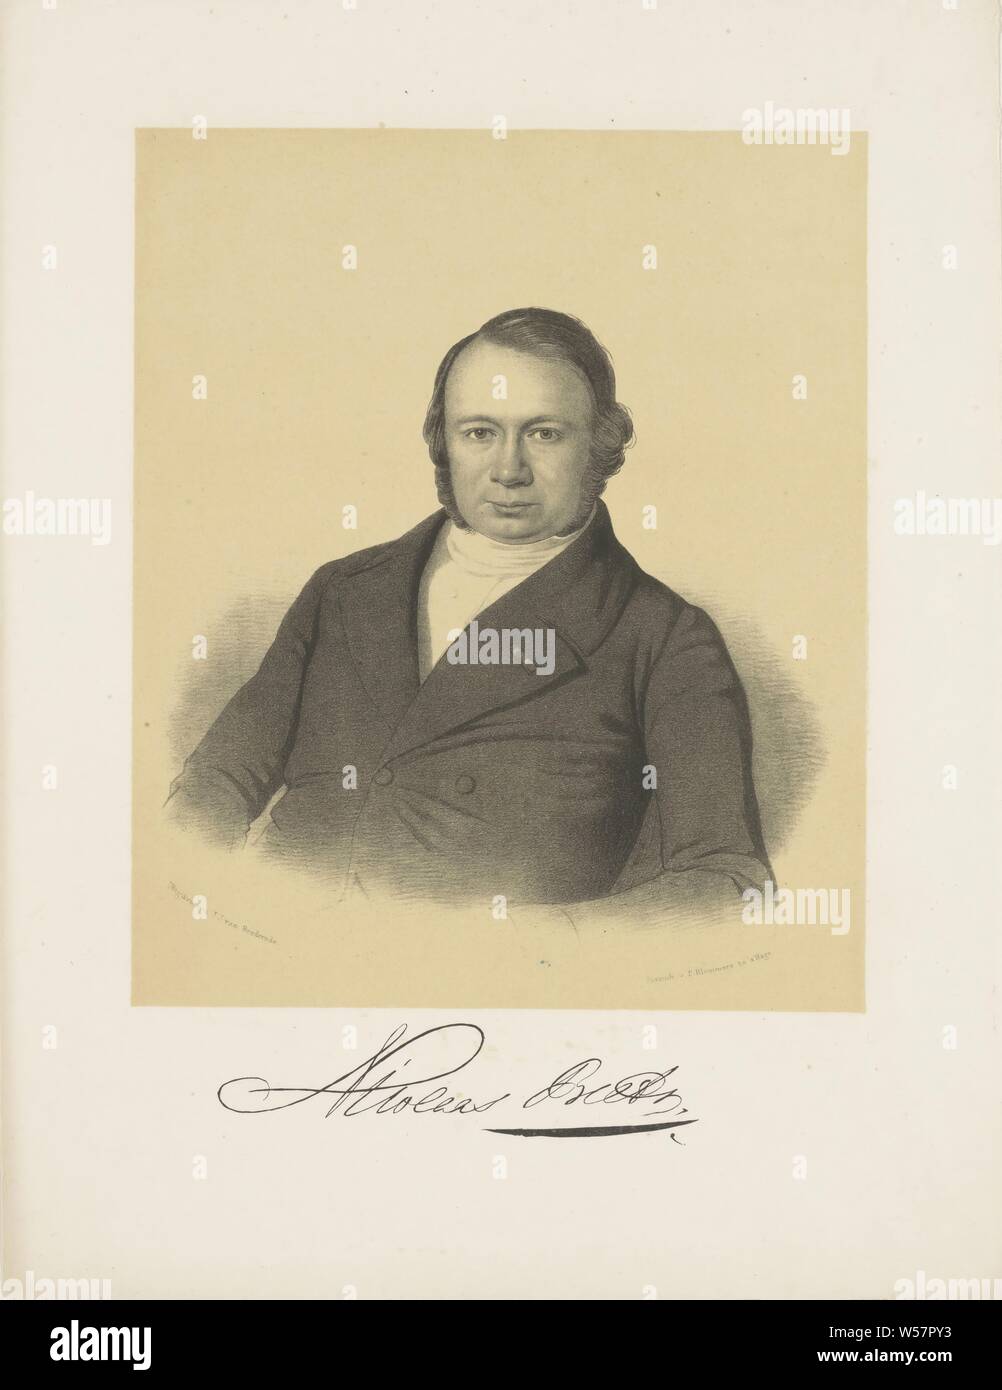 Portrait of Nicolaas Beets, The person portrayed leans back a little. He is wearing a knightly order on the lapel of his jacket. Under the portrait are signature, historical persons ((full) bust portrait), knighthood order, Nicolaas Beets, Adrianus Johannes Ehnle (attributed to), 1850 - 1863, paper, h 355 mm × w 275 mm Stock Photo